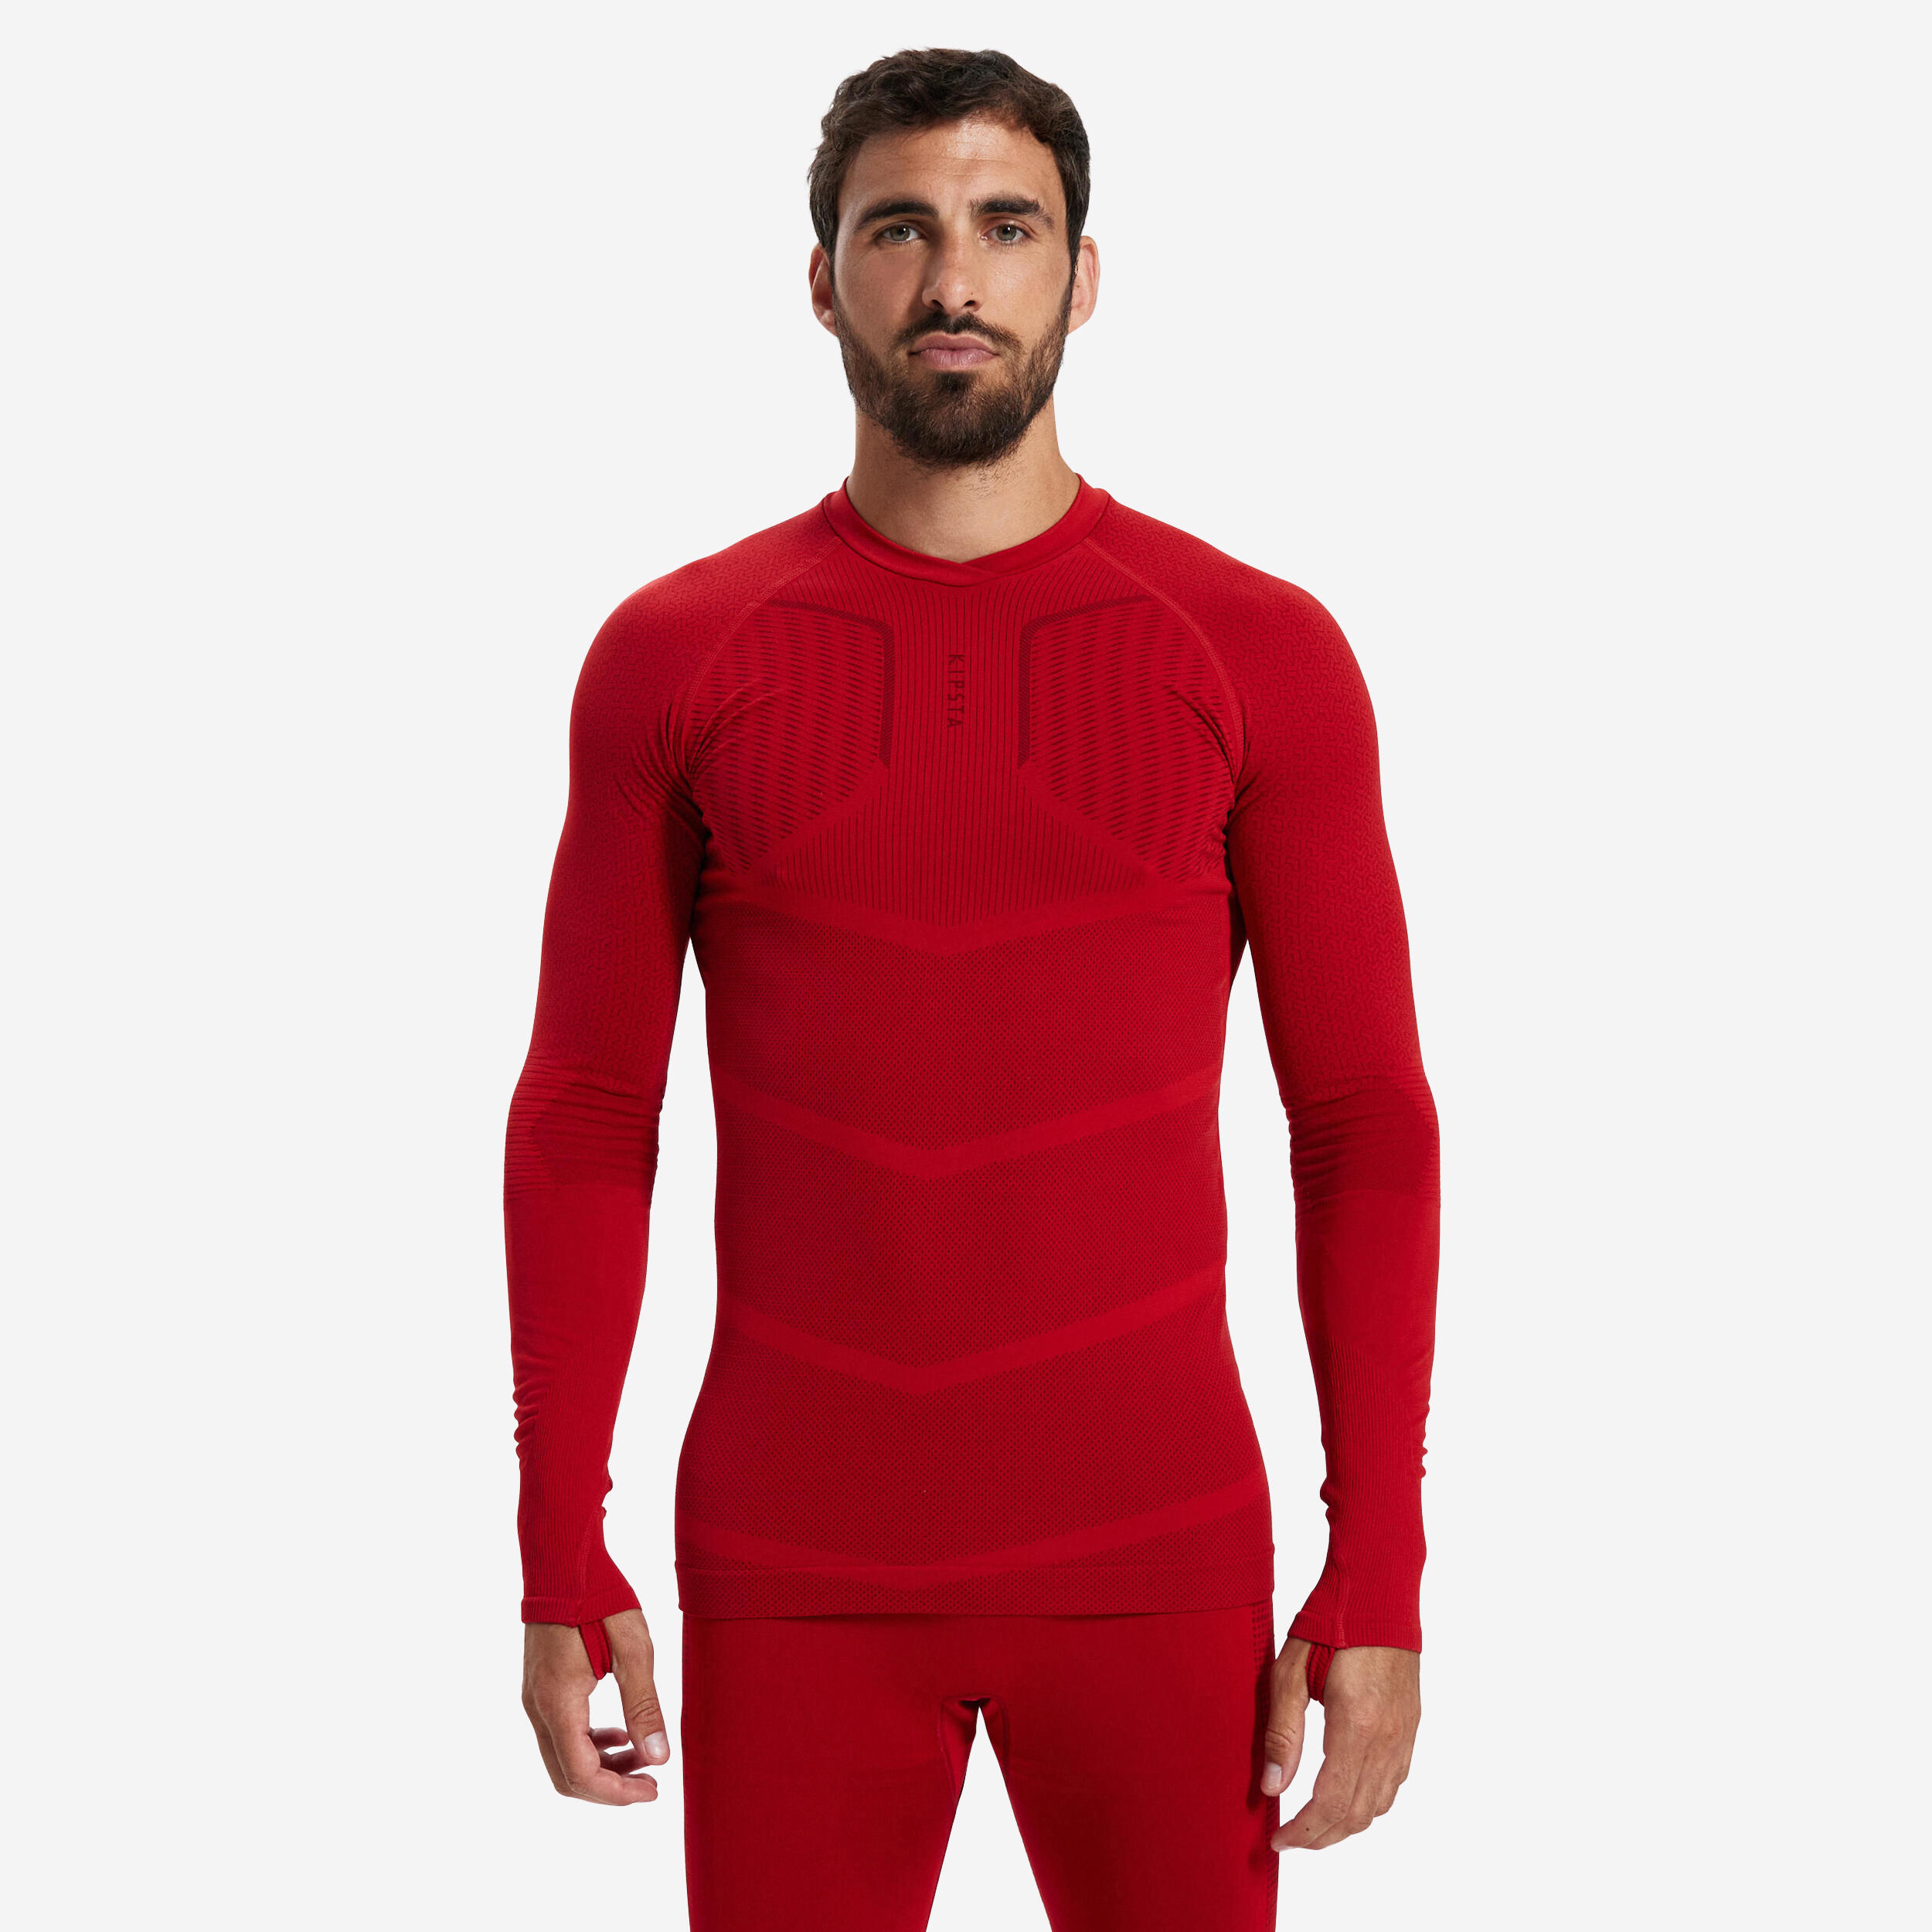 Adult Long-Sleeved Thermal Base Layer Top Keepdry 500 - Red 1/15